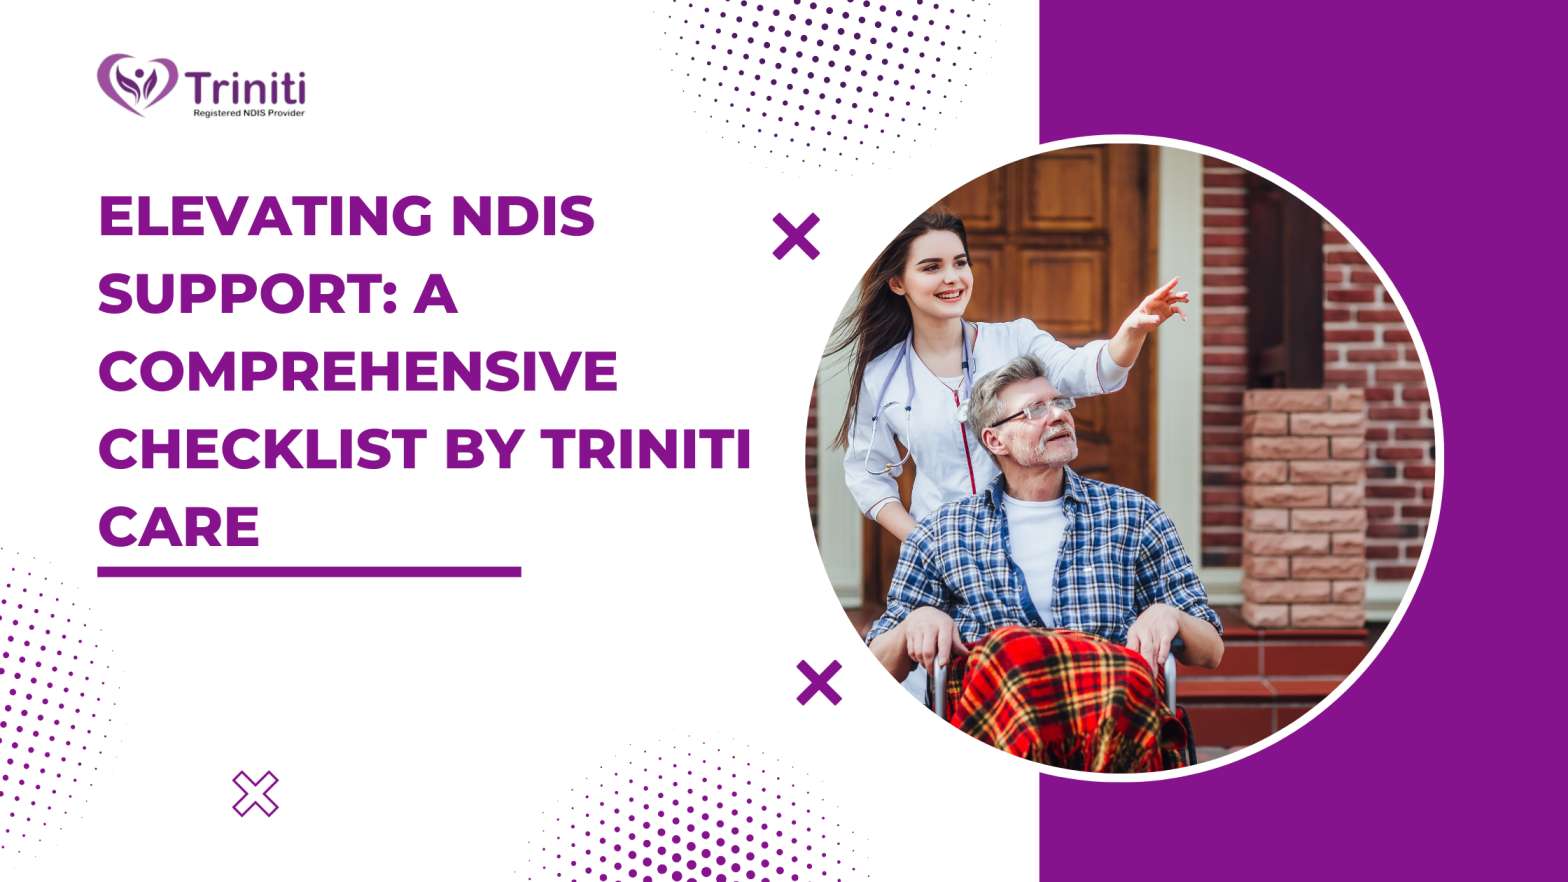 Elevating NDIS Support: A Comprehensive Checklist by Triniti Care